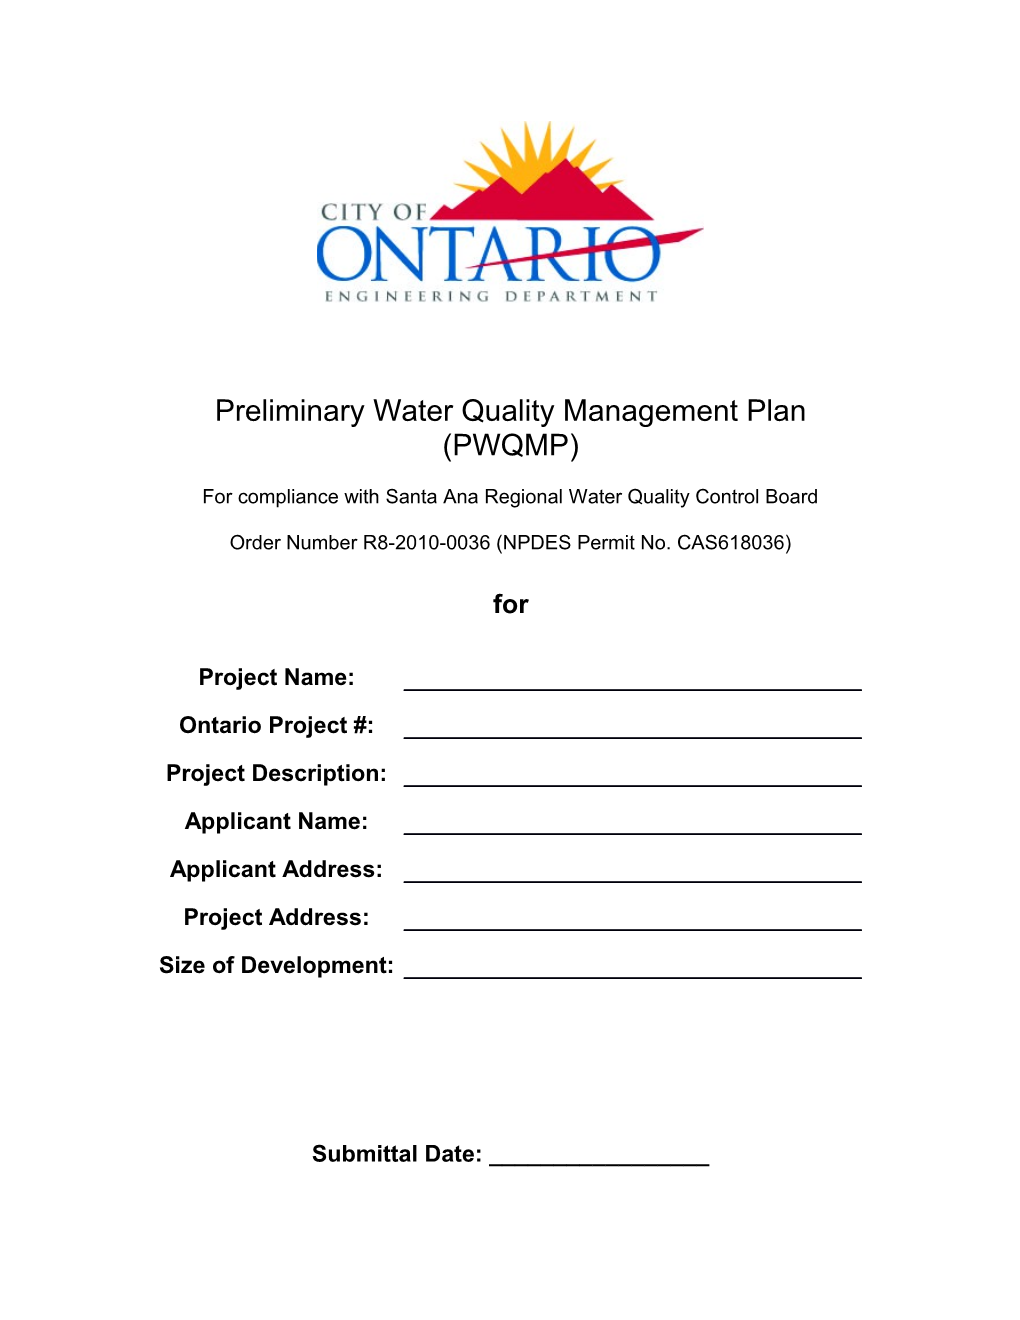 Preliminary Water Quality Management Plan